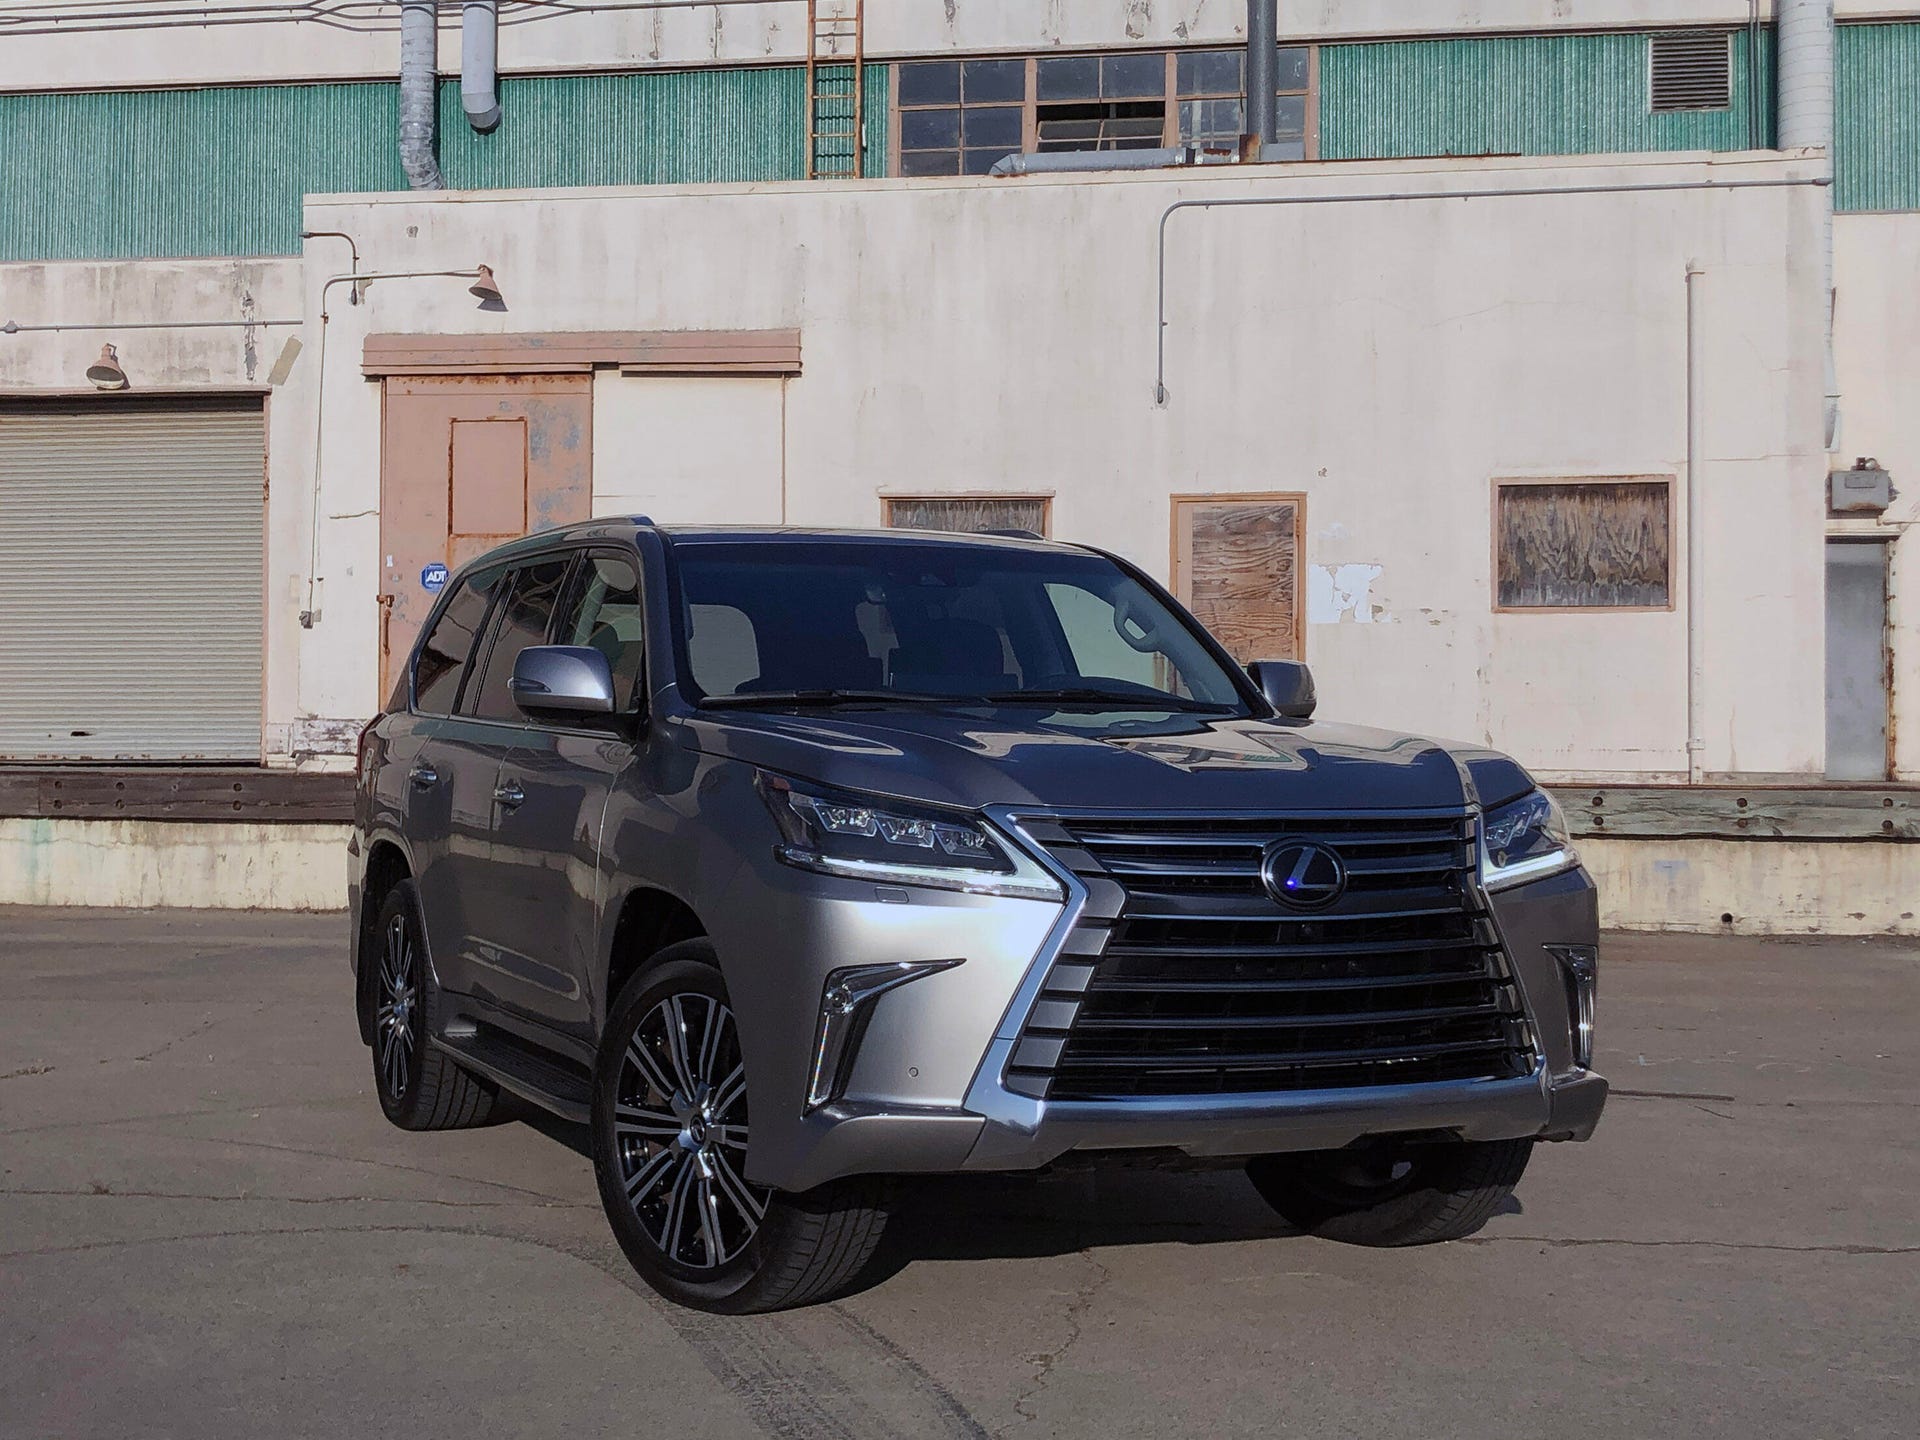 2021 Lexus LX 570 review: An off-road champ, but tough to recommend - CNET